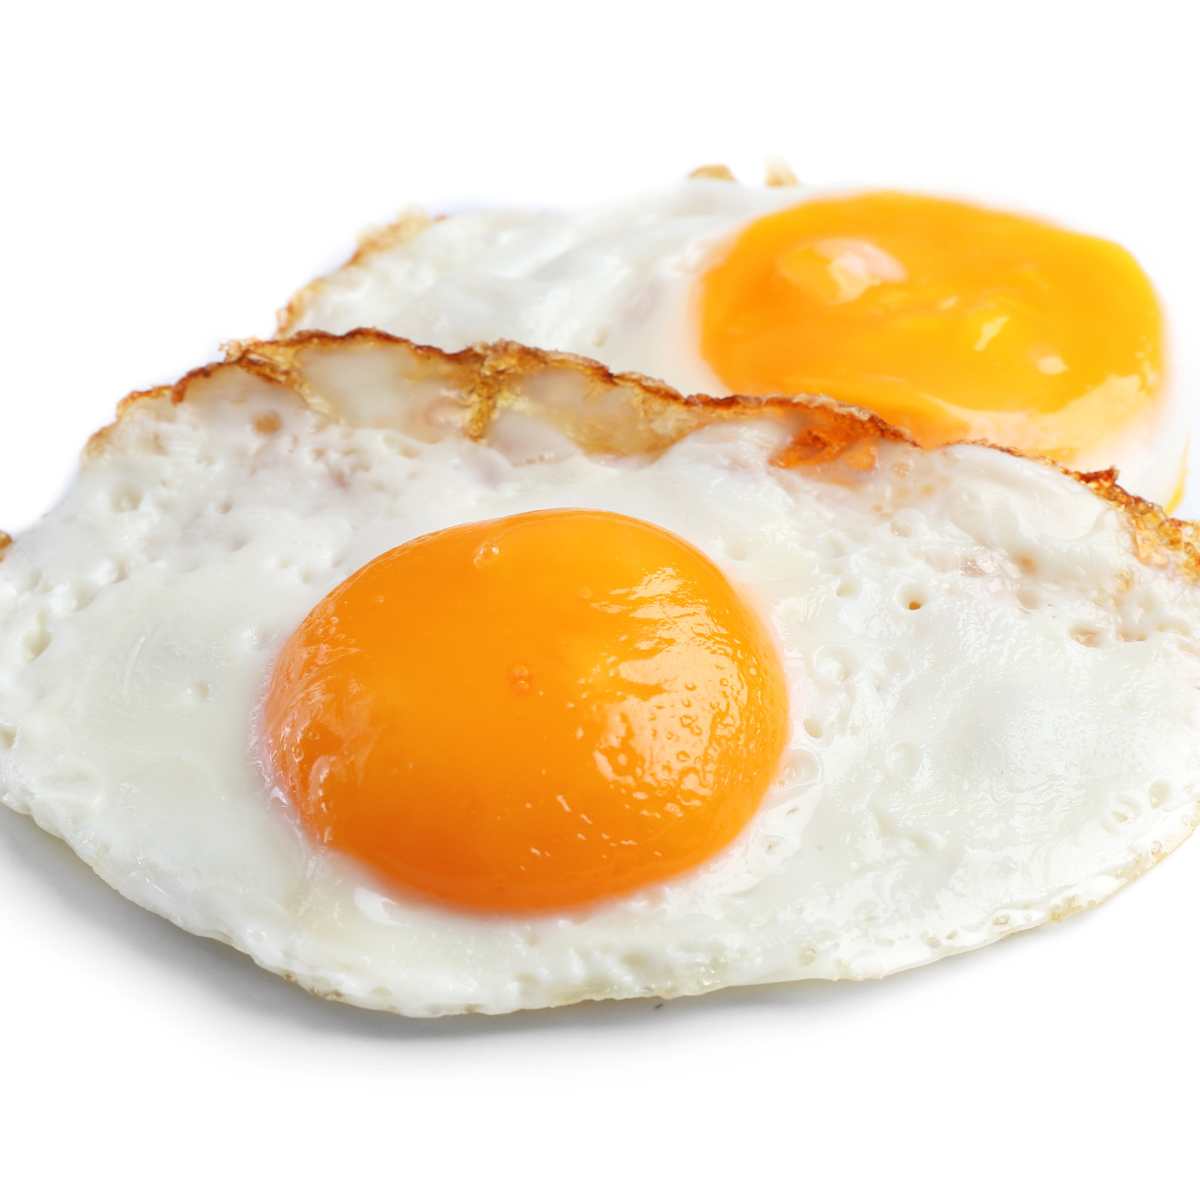 Sunny side up egg on a white background.